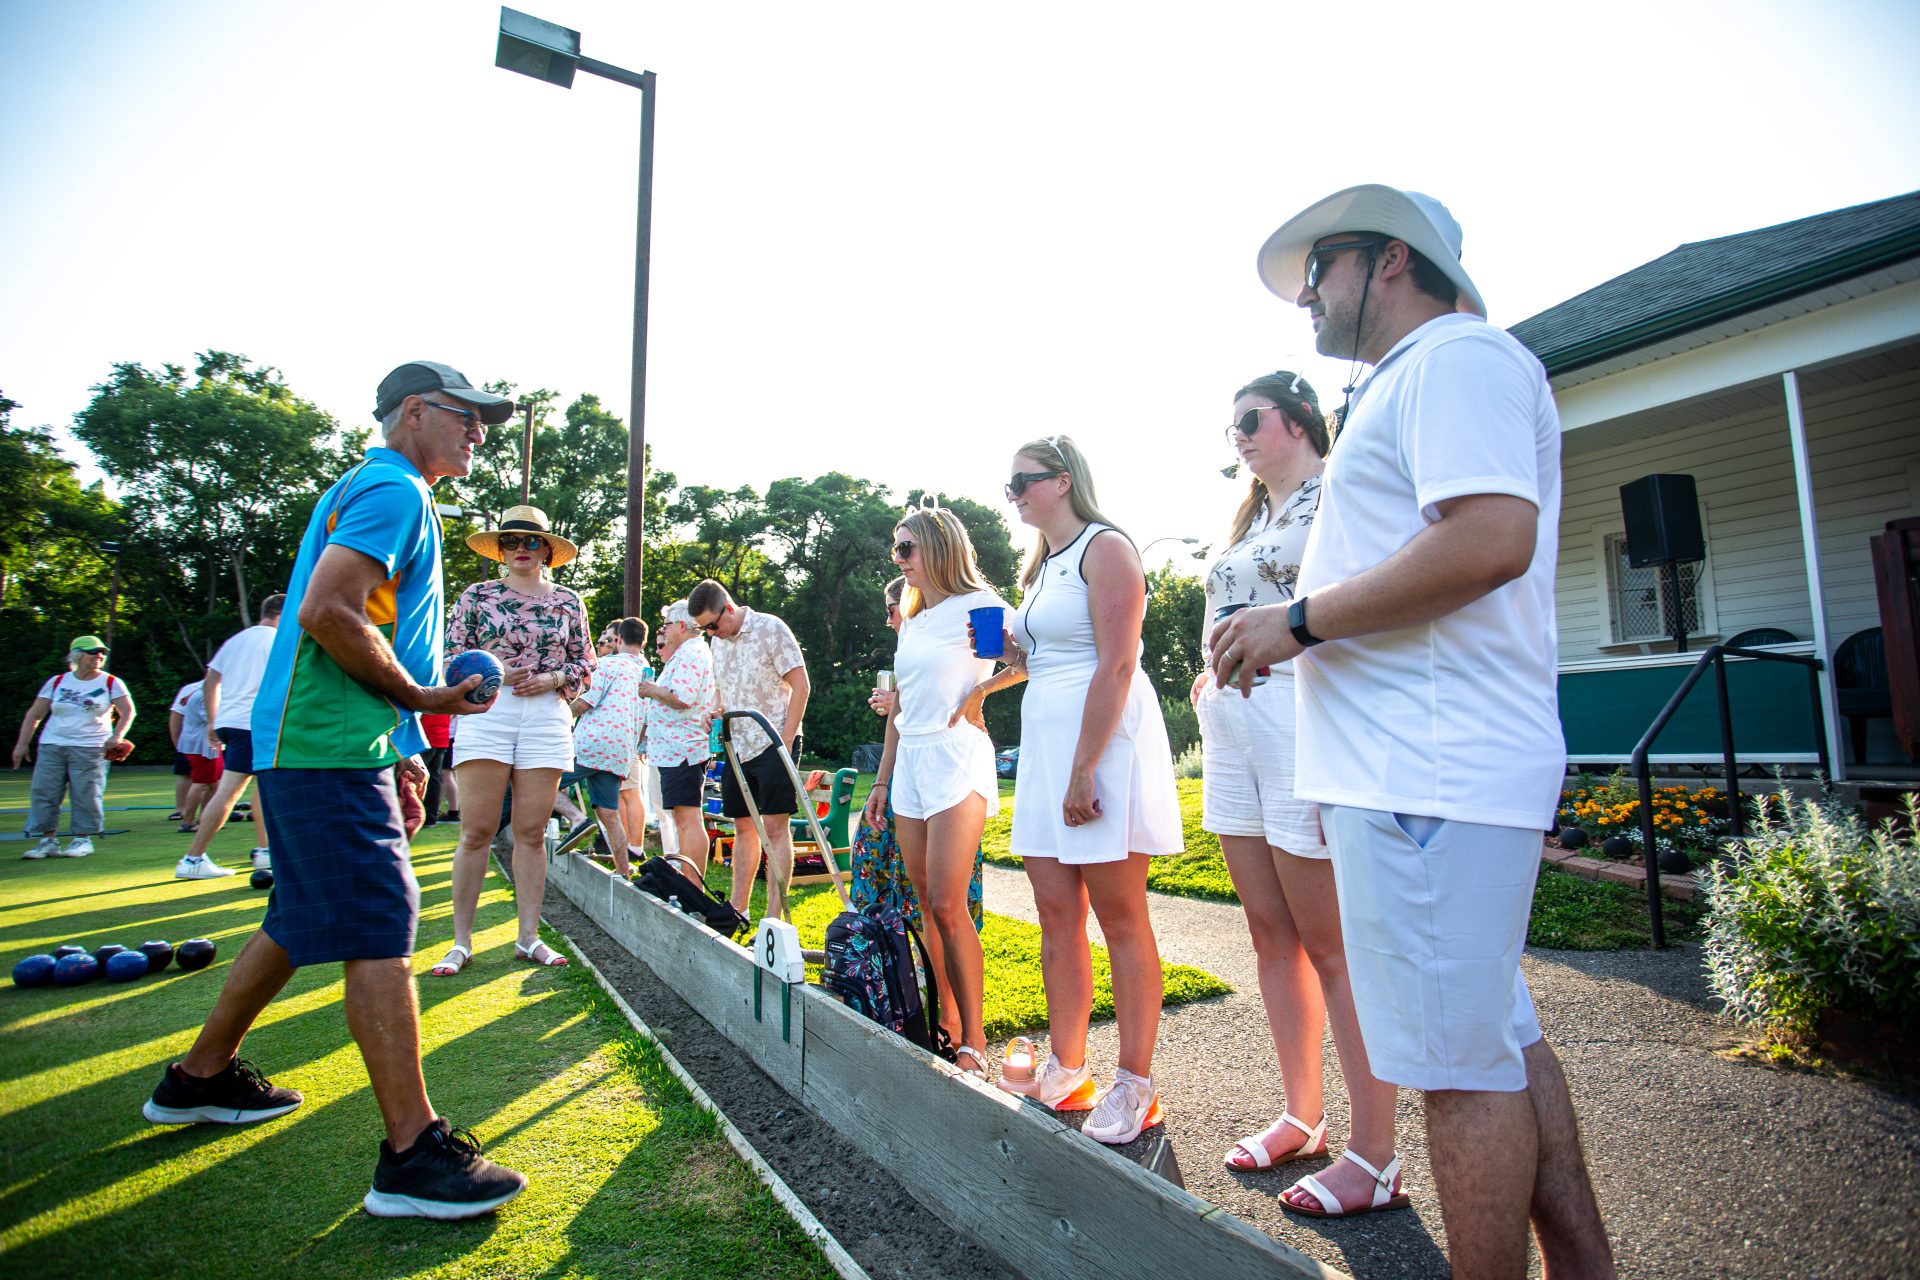 Elmdale Lawn Bowling Club member Ken Waterman, left, provides some pre-match pointers to The Bowler Bears, Eric Gollinger, Alexis Small, Katie Vaughan, and Catherine MacDonald at Lawn Summer Nights, a fundraiser for Cystic Fibrosis Canada at the Elmdale Lawn Bowling Club in Ottawa on July 5, 2023.